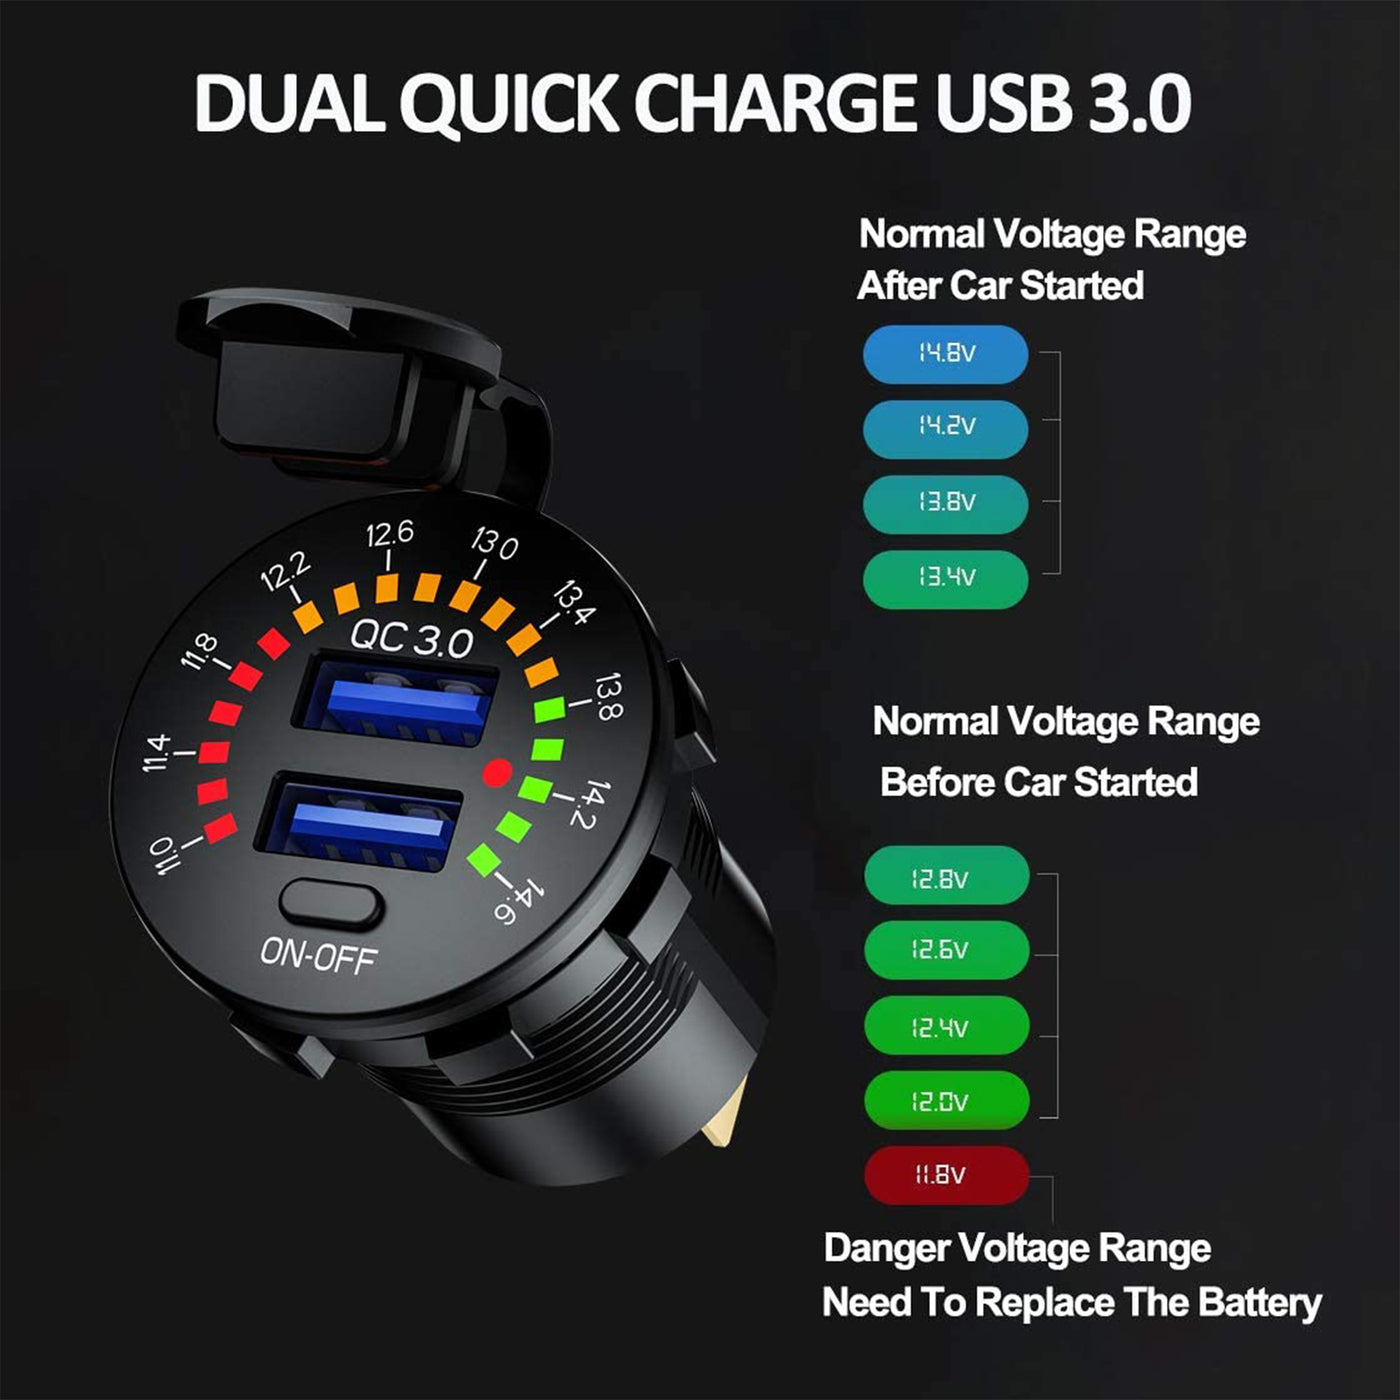 12V Dual QC3.0 USB Charger with Color Digital Voltmeter and Switch - DAIER